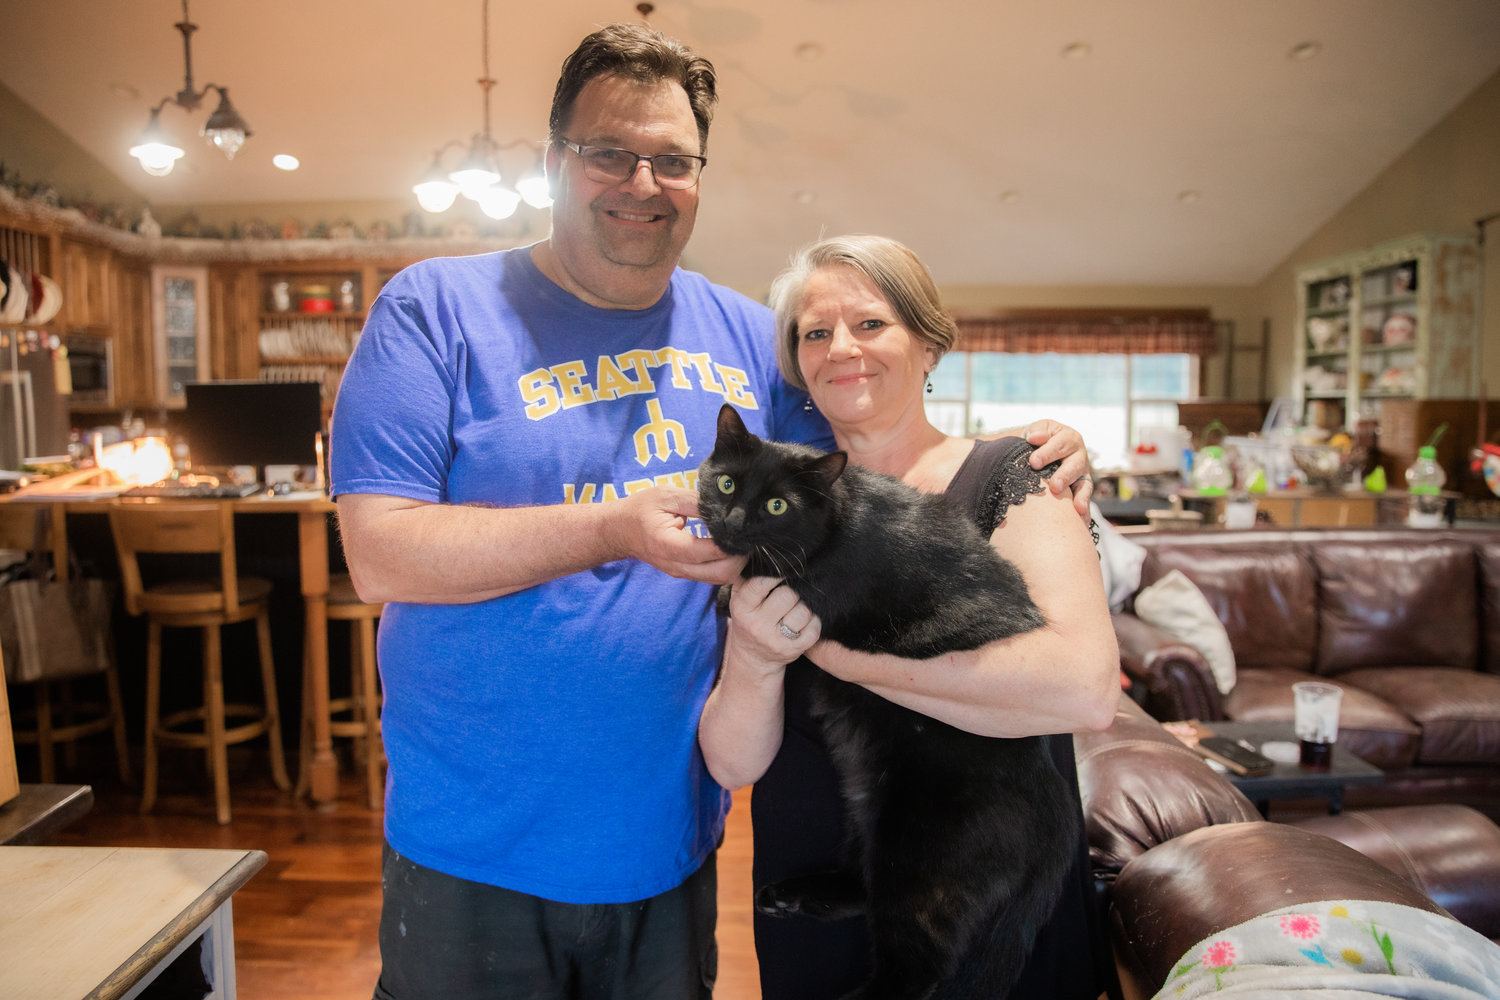 Ken and Julie Wiseman smile for a photo with their cat Raven on Wednesday after he was rescued from a utility pole by Lewis County Public Utility District employees outside their residence along Frogner Road.